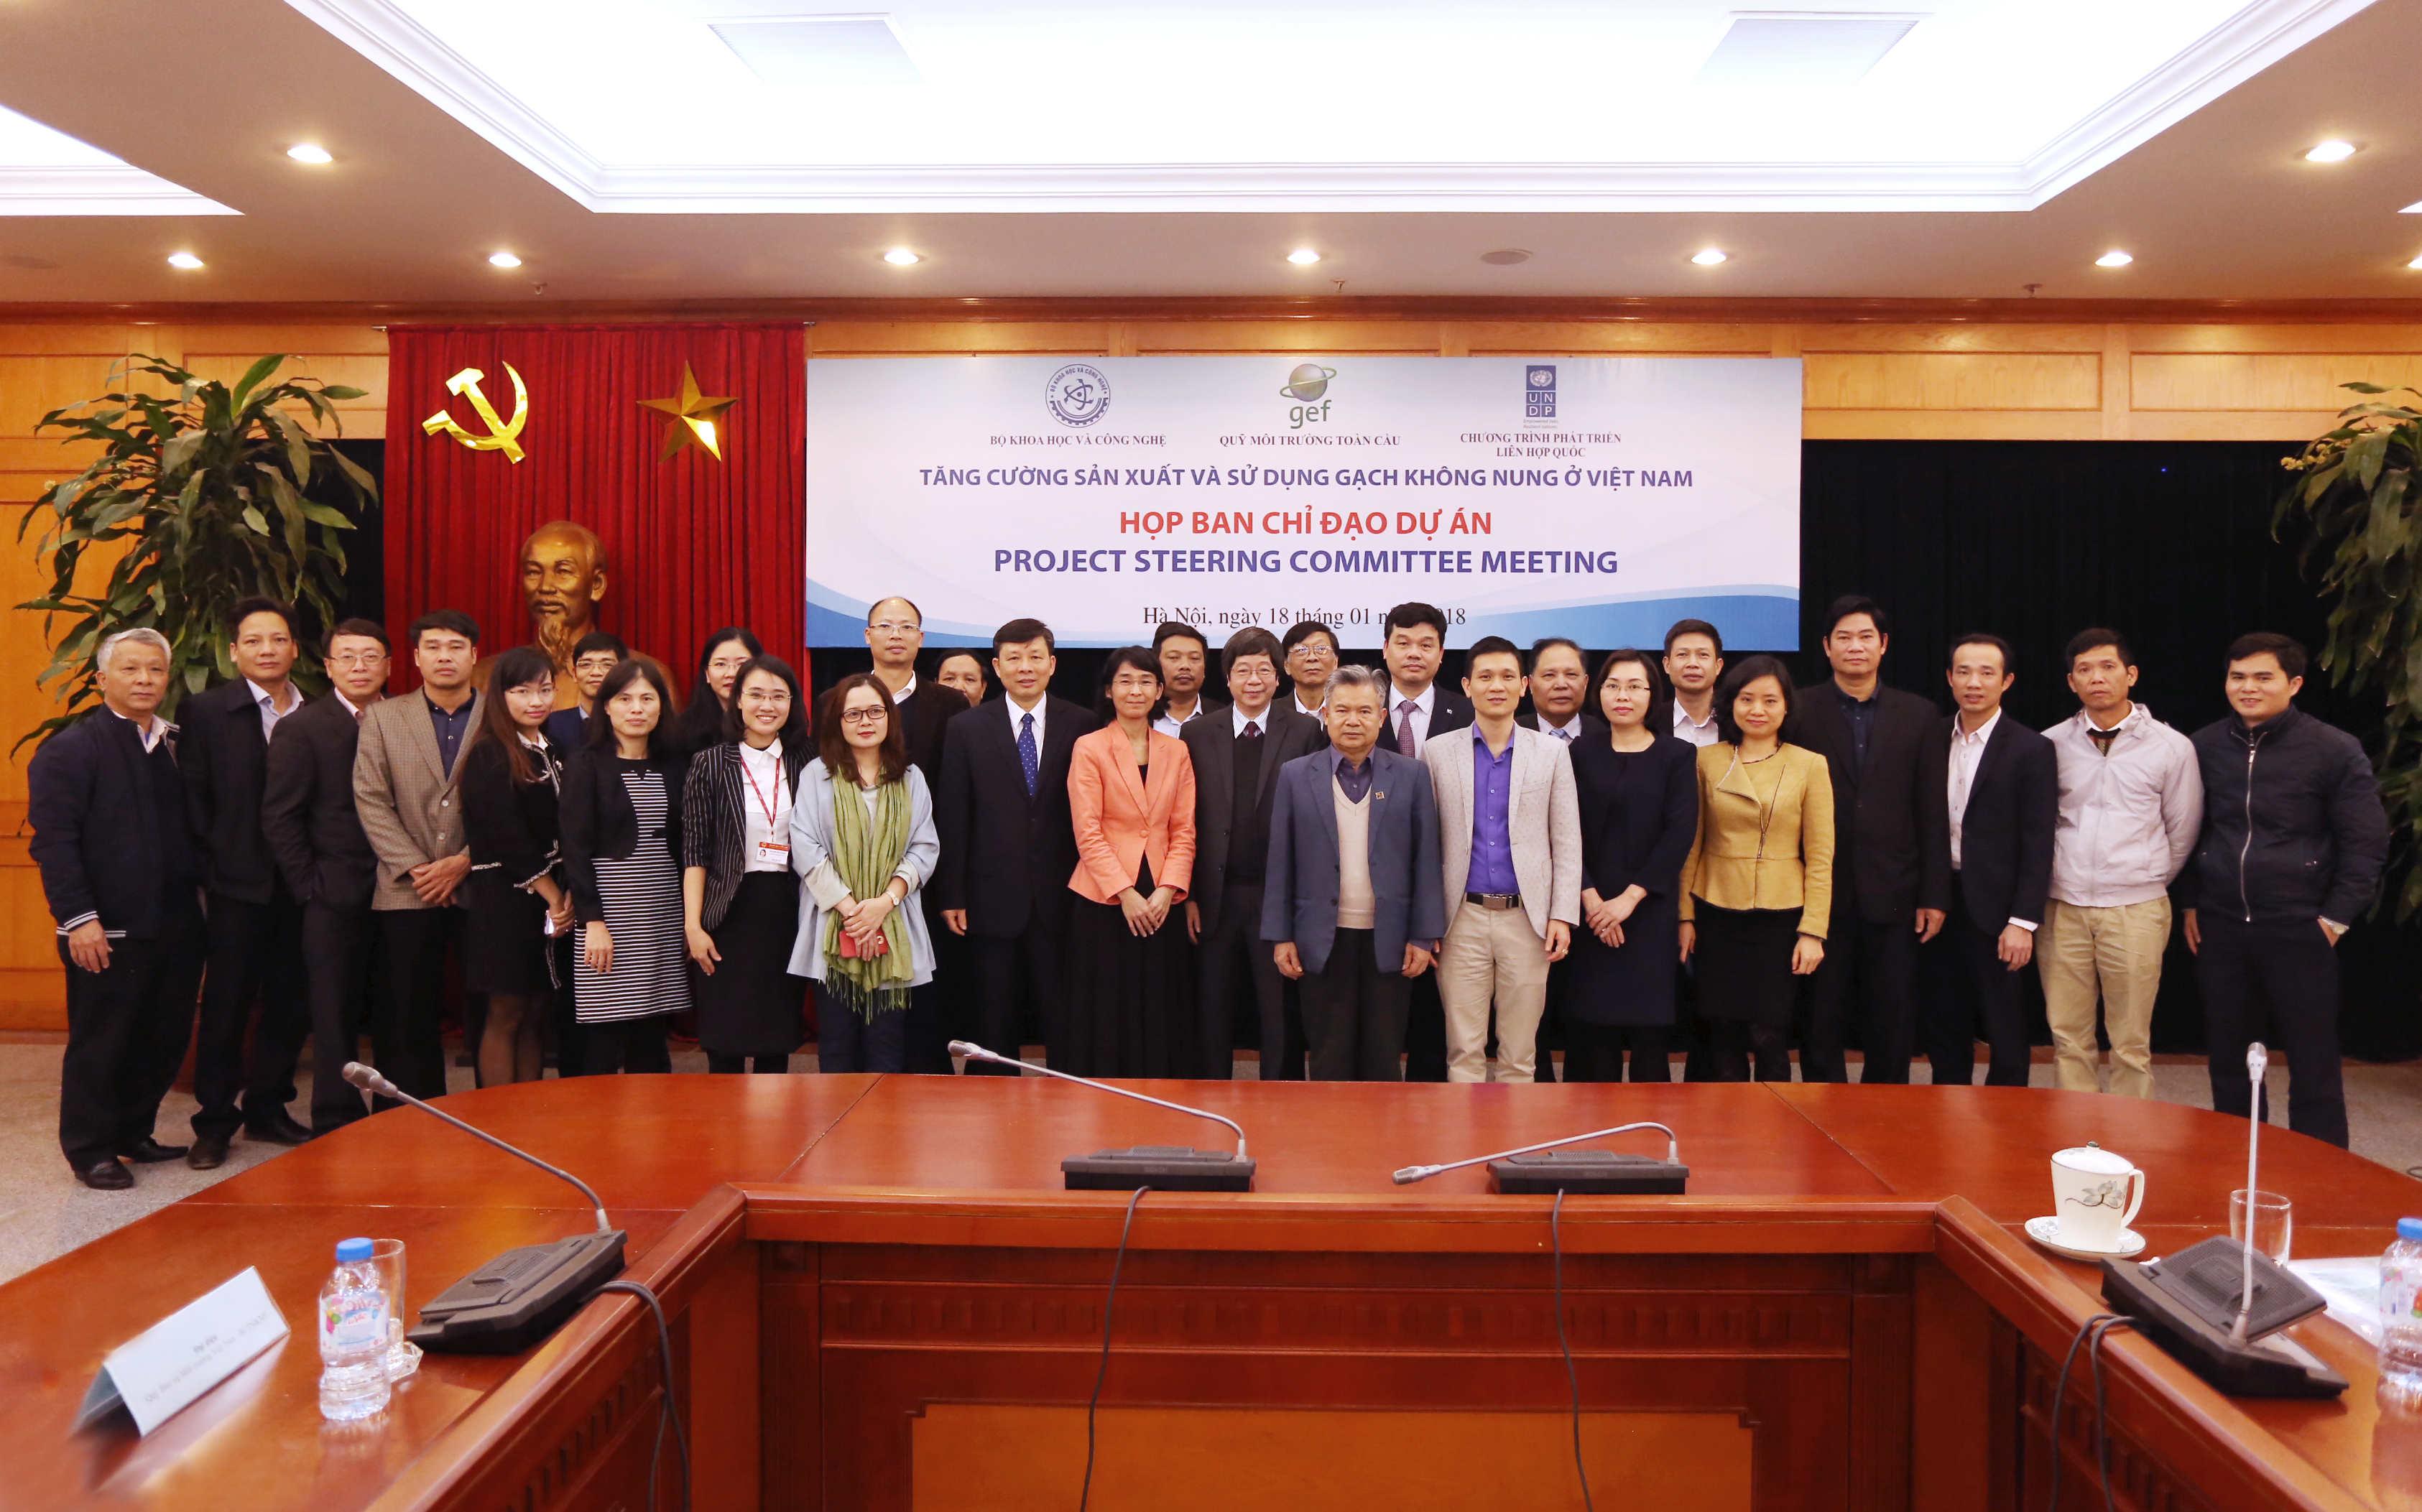 Project Steering Committee Meeting on “Promotion of non-fired bricksproduction and utilization in Vietnam”